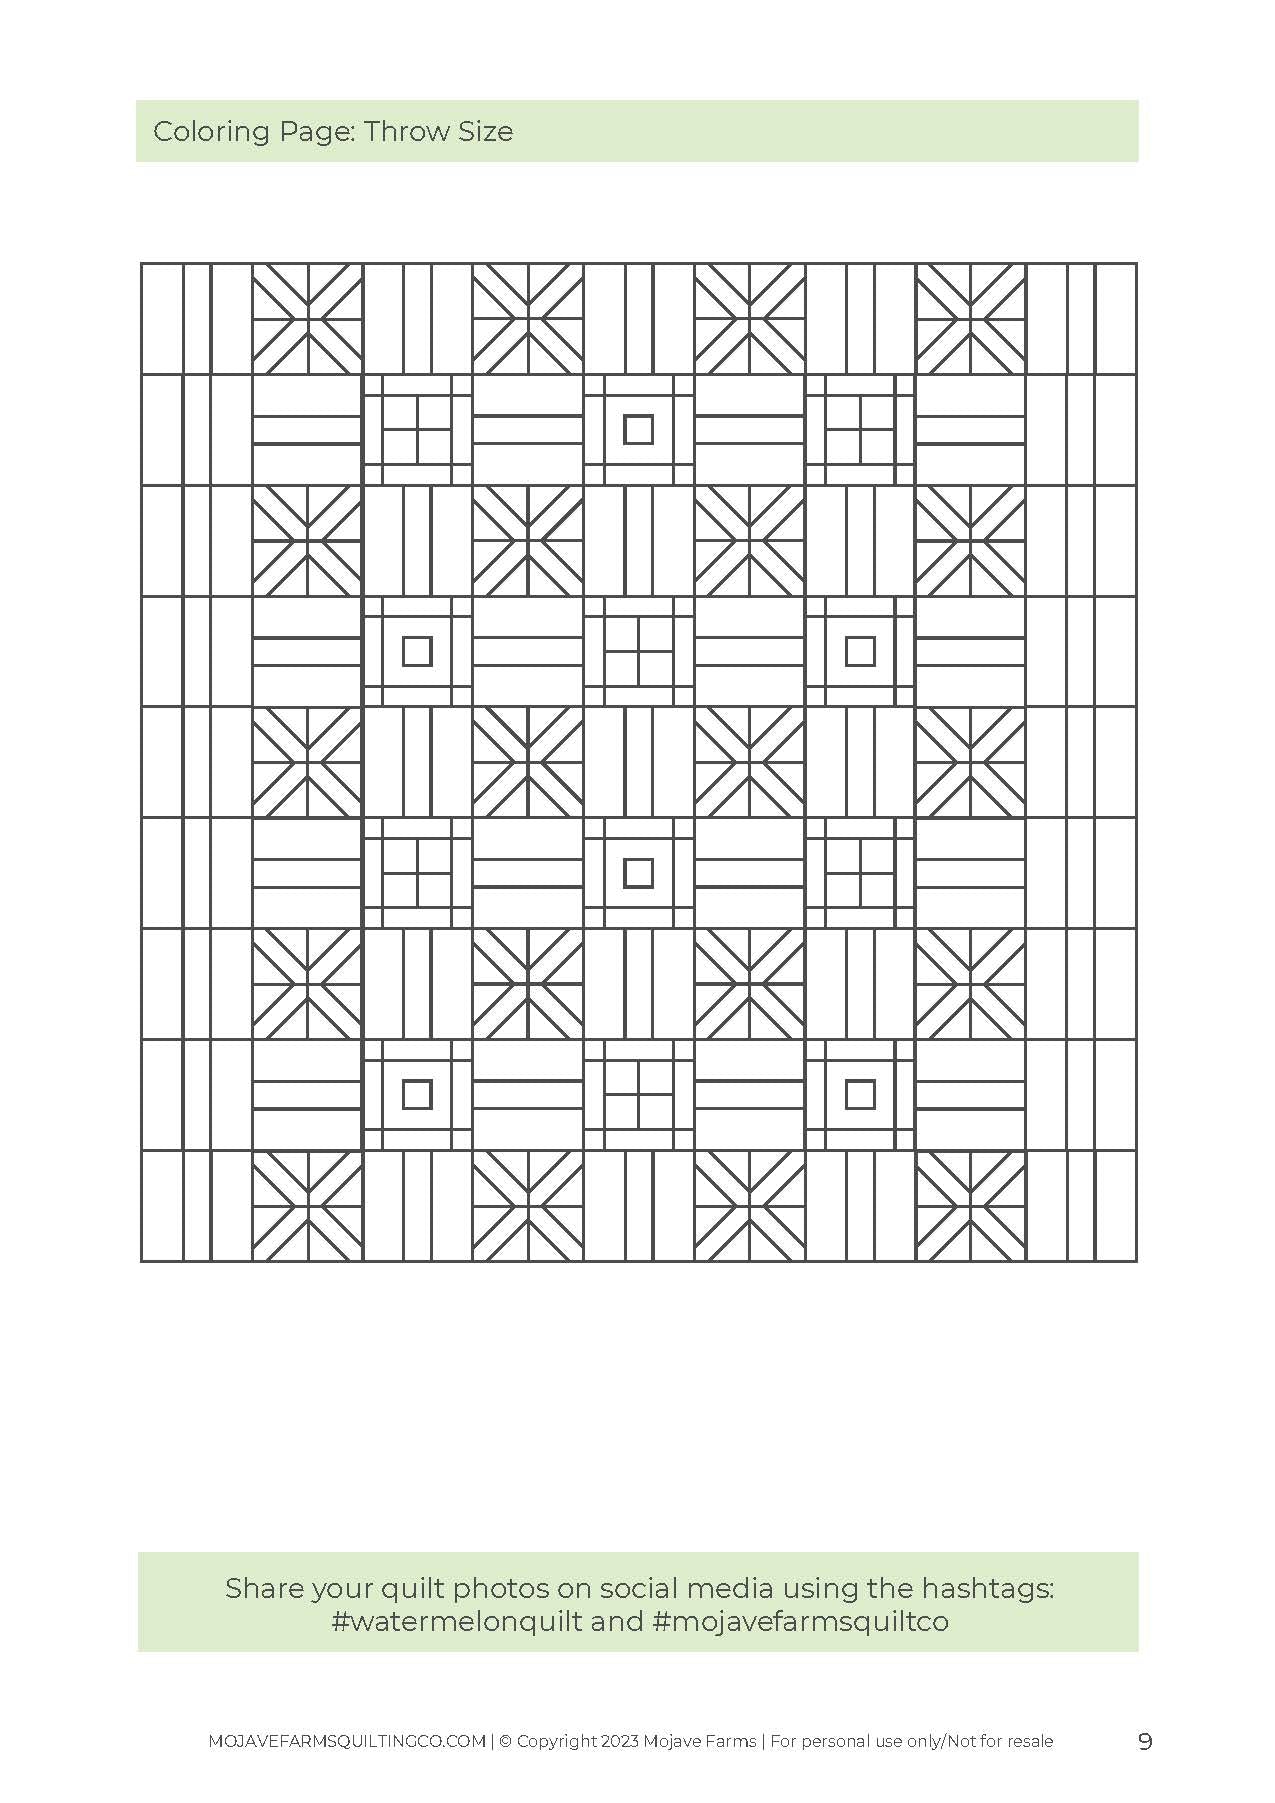 Watermelon Quilt Coloring Page